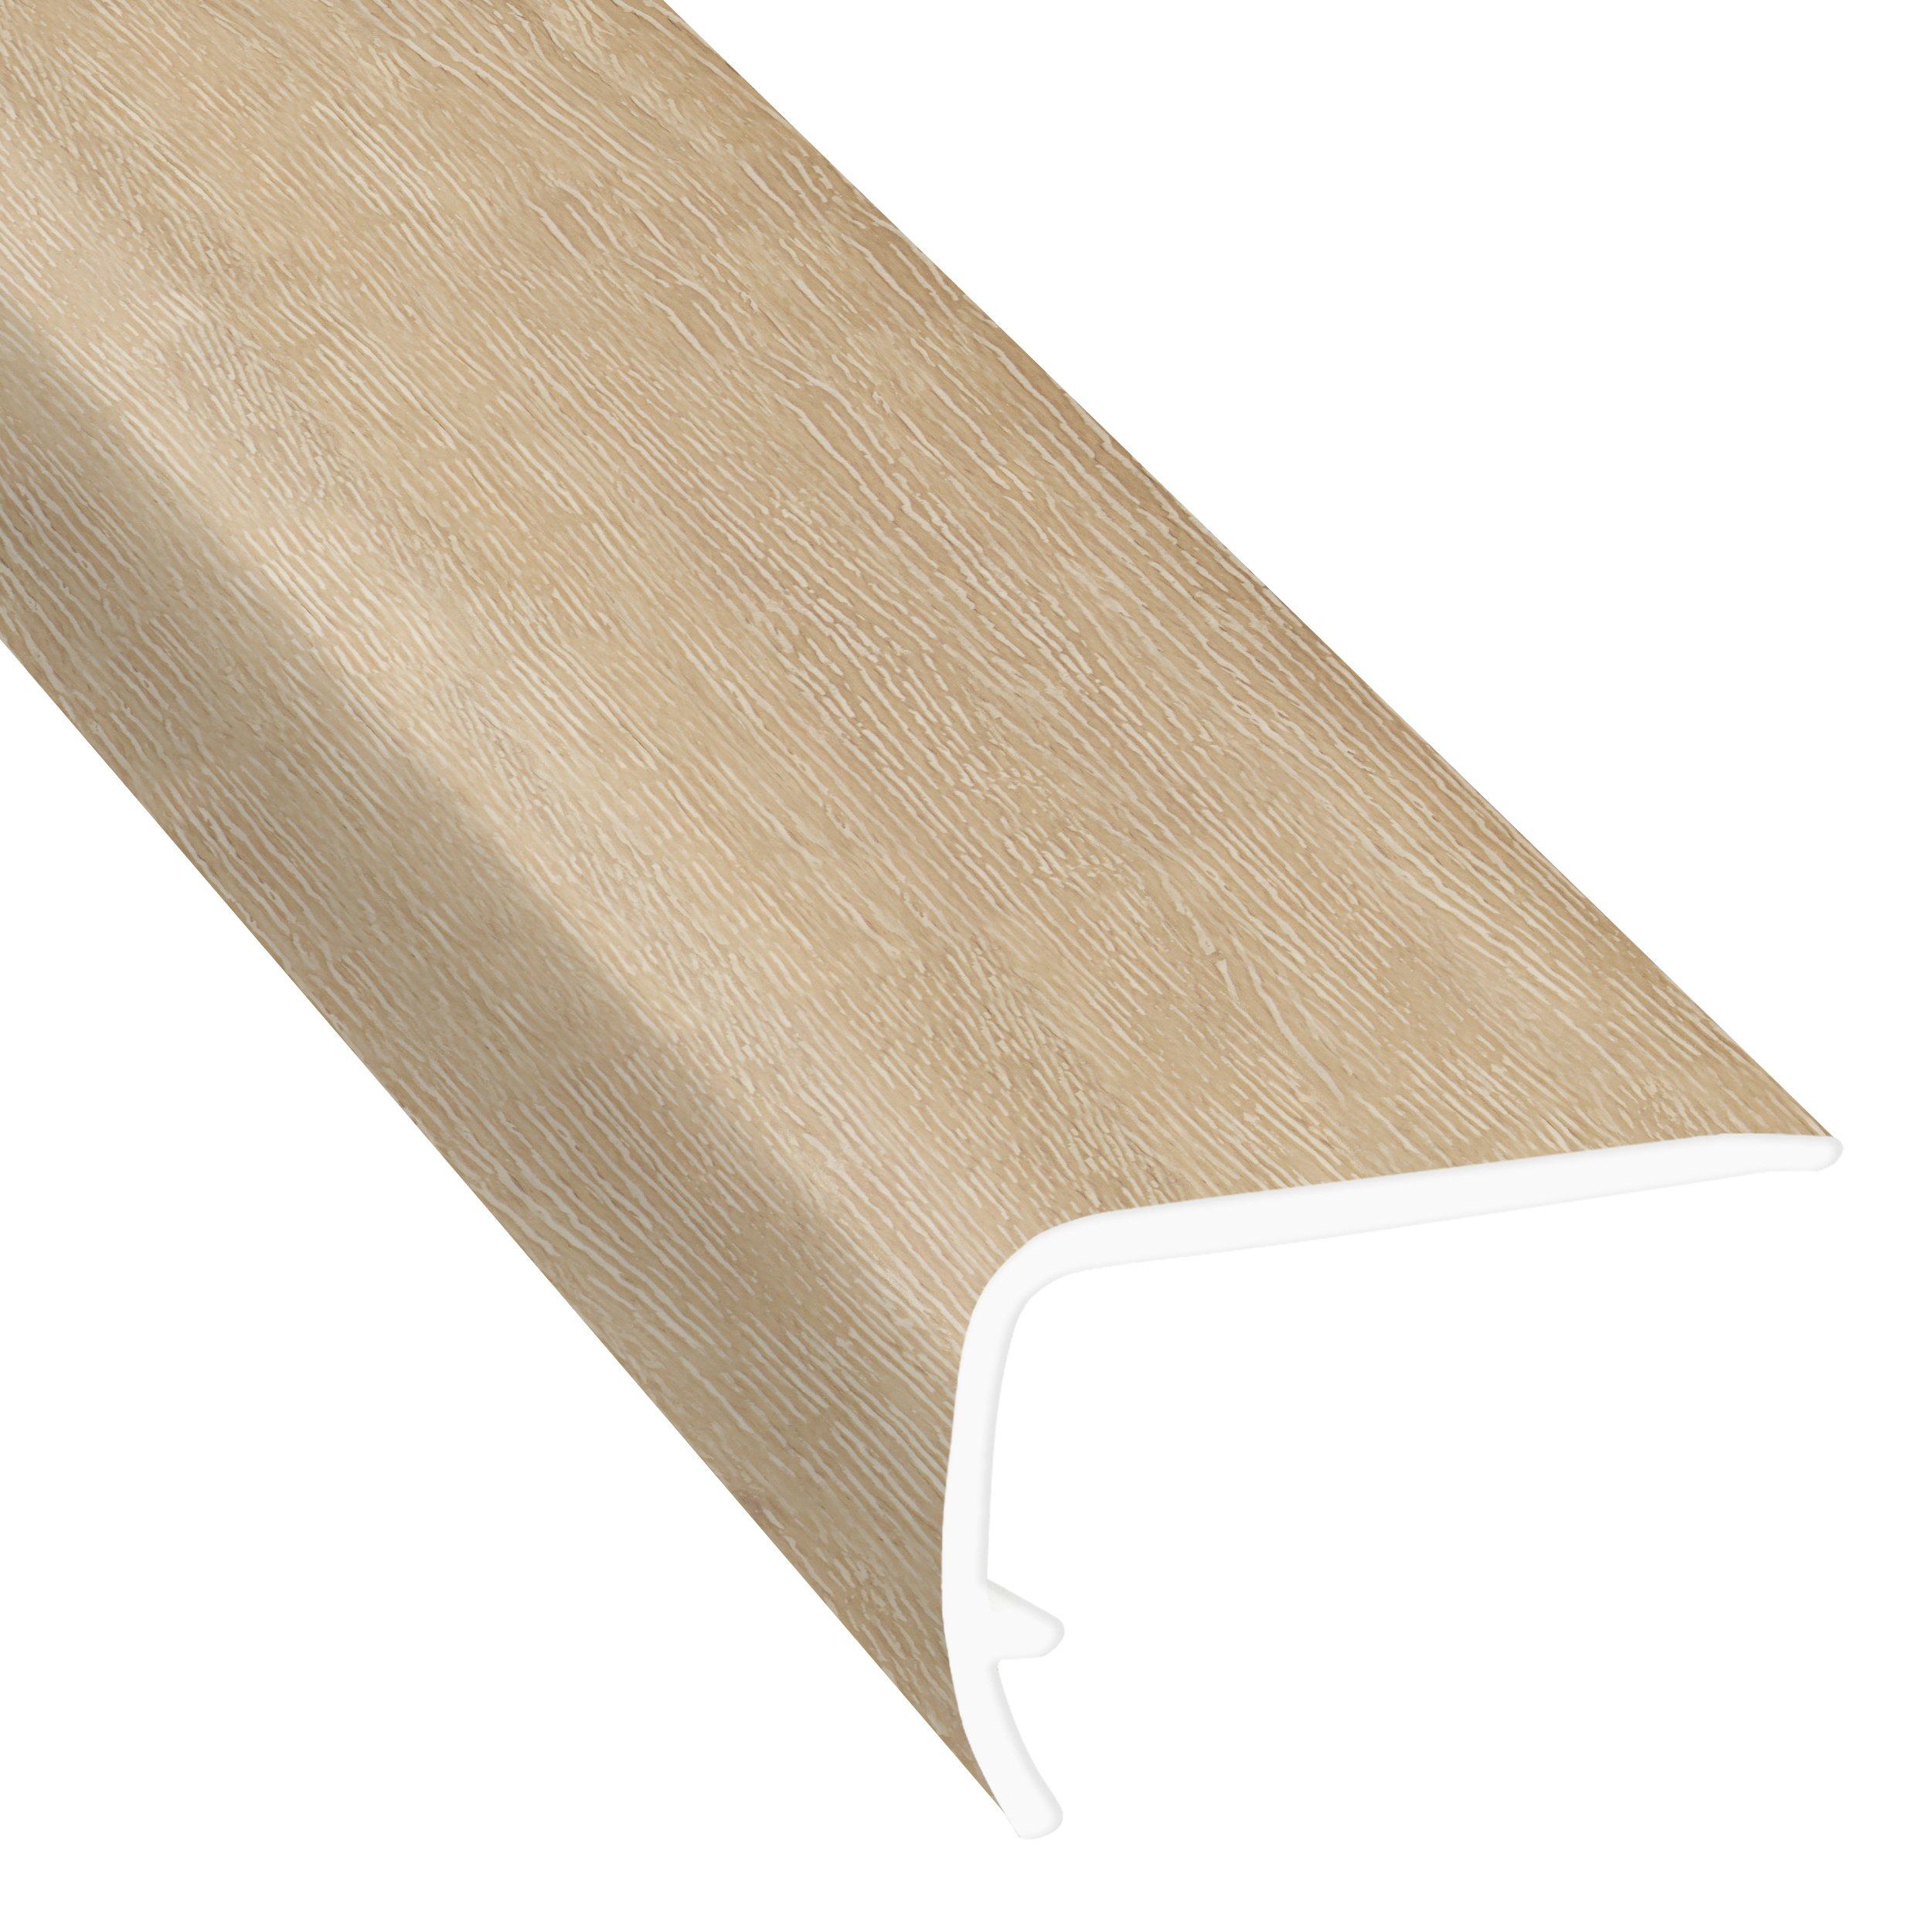 Camellia Chase 94in. Vinyl Overlapping Stair Nose